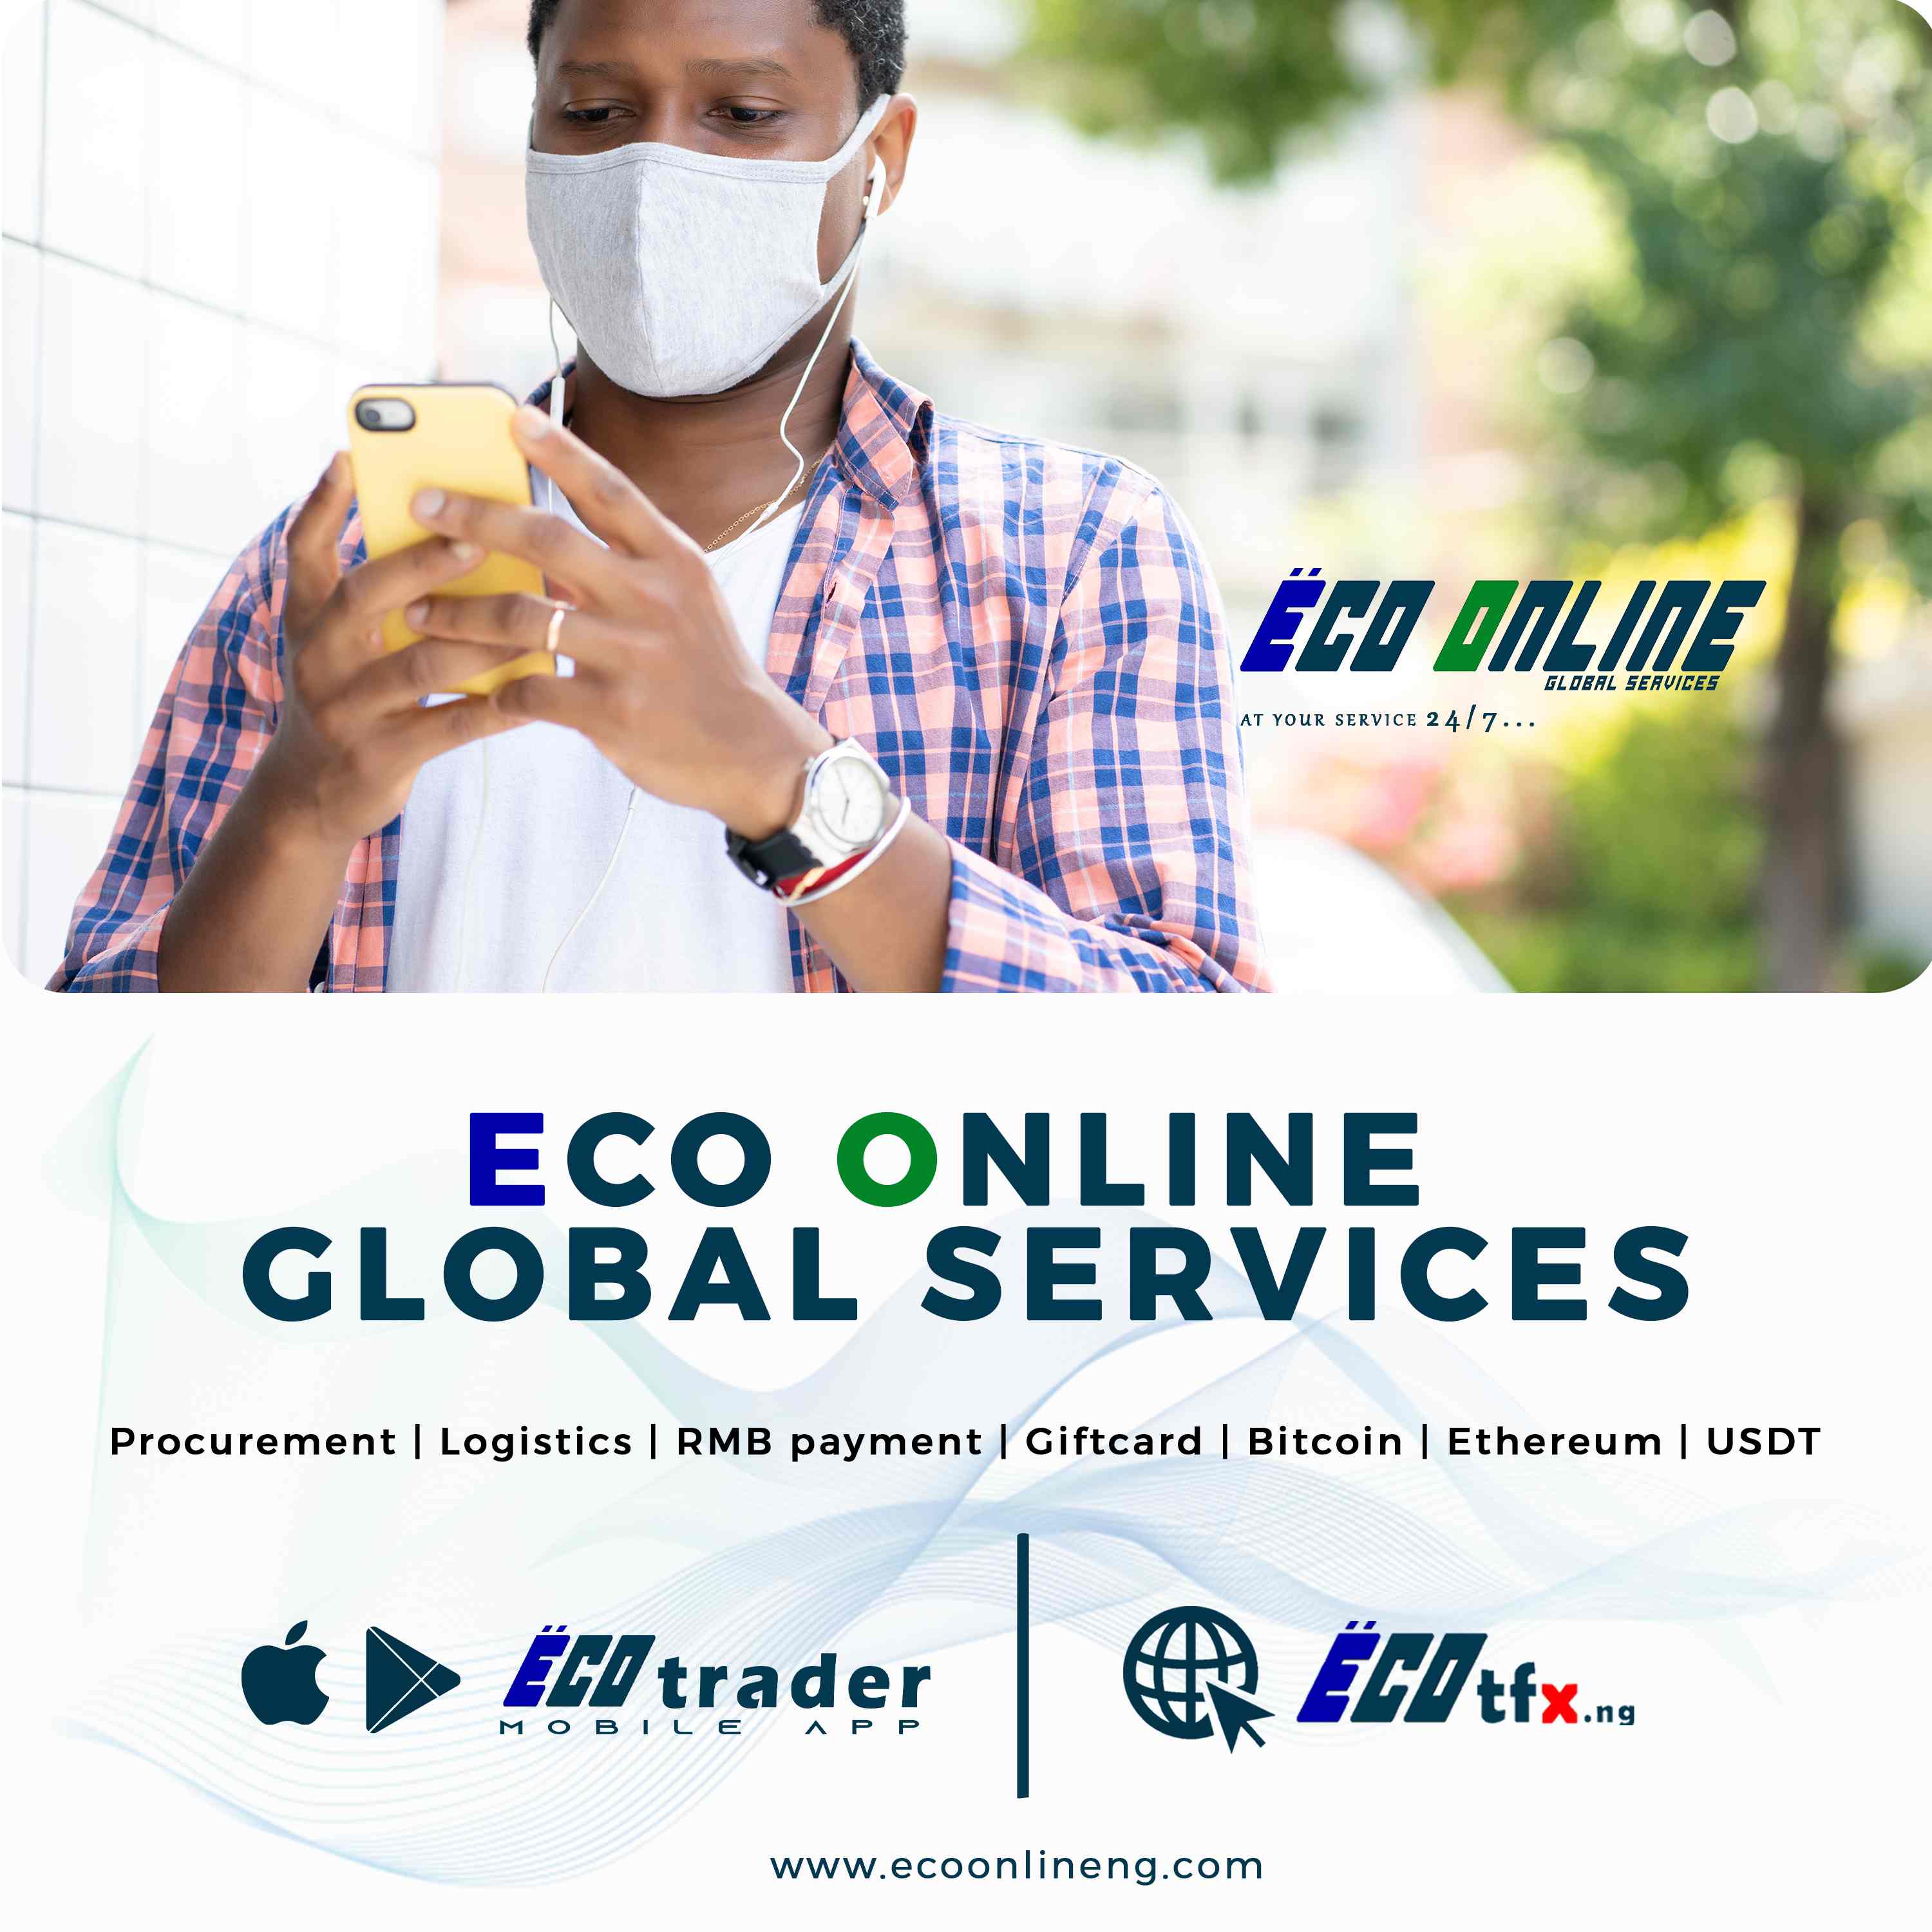 ECO ONLINE GLOBAL SERVICES LAUNCHES TRADING APP “ECO TRADER”